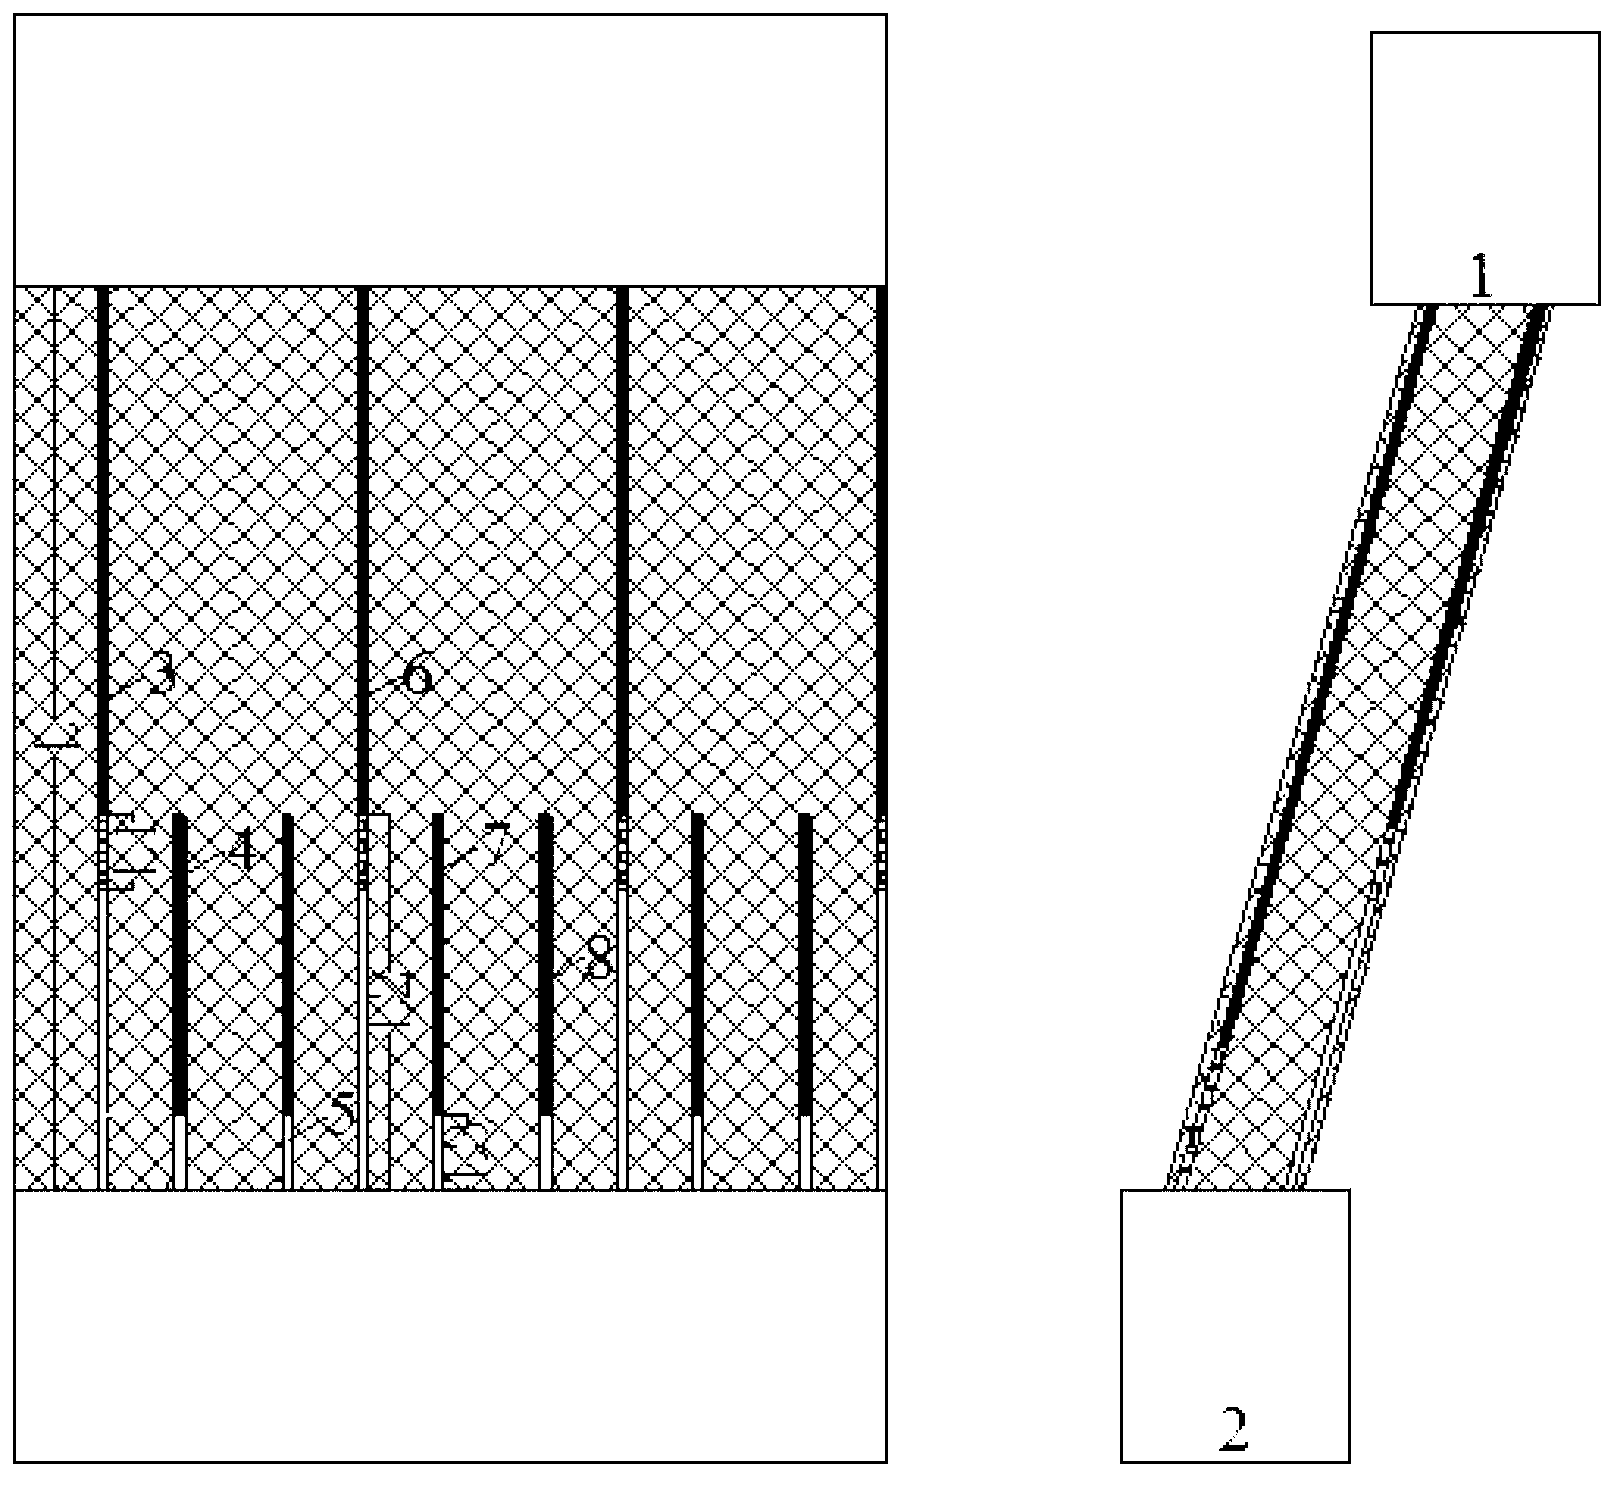 Blasting method for reducing depletion in steeply inclined thin ore body recovery